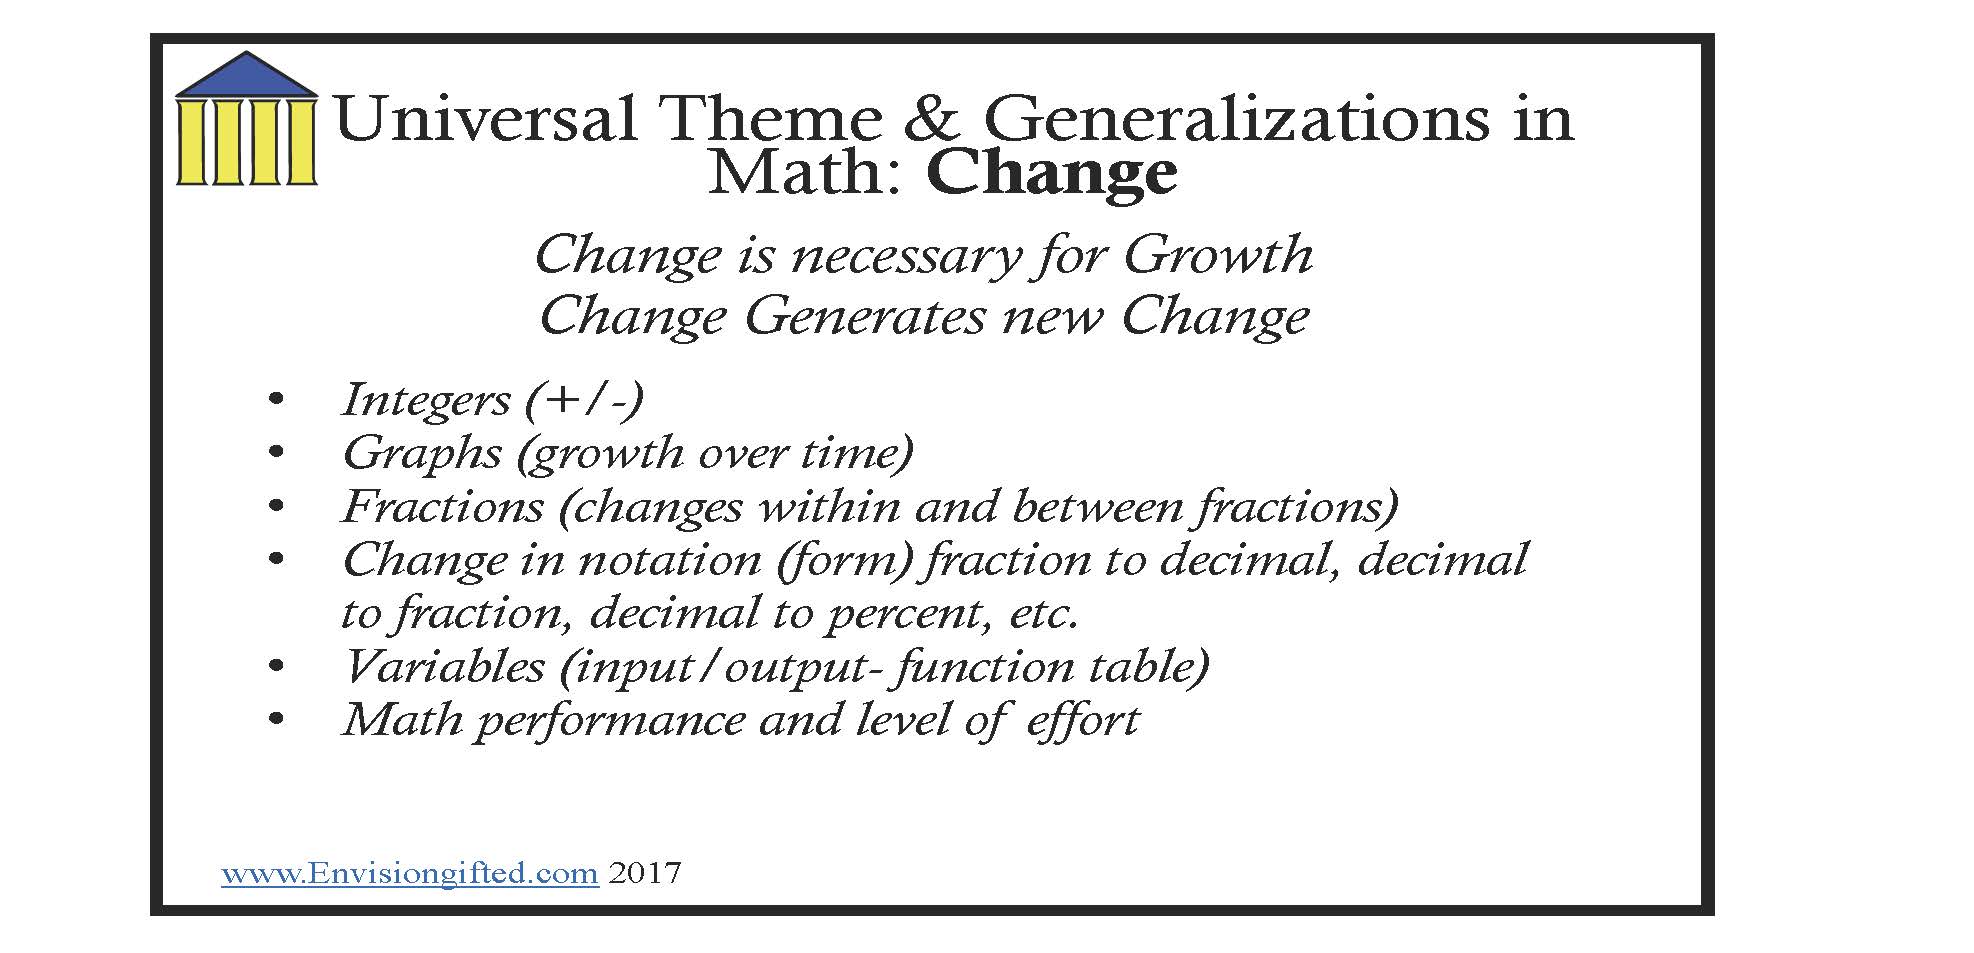 Envision Gifted. Universal Theme Change Math